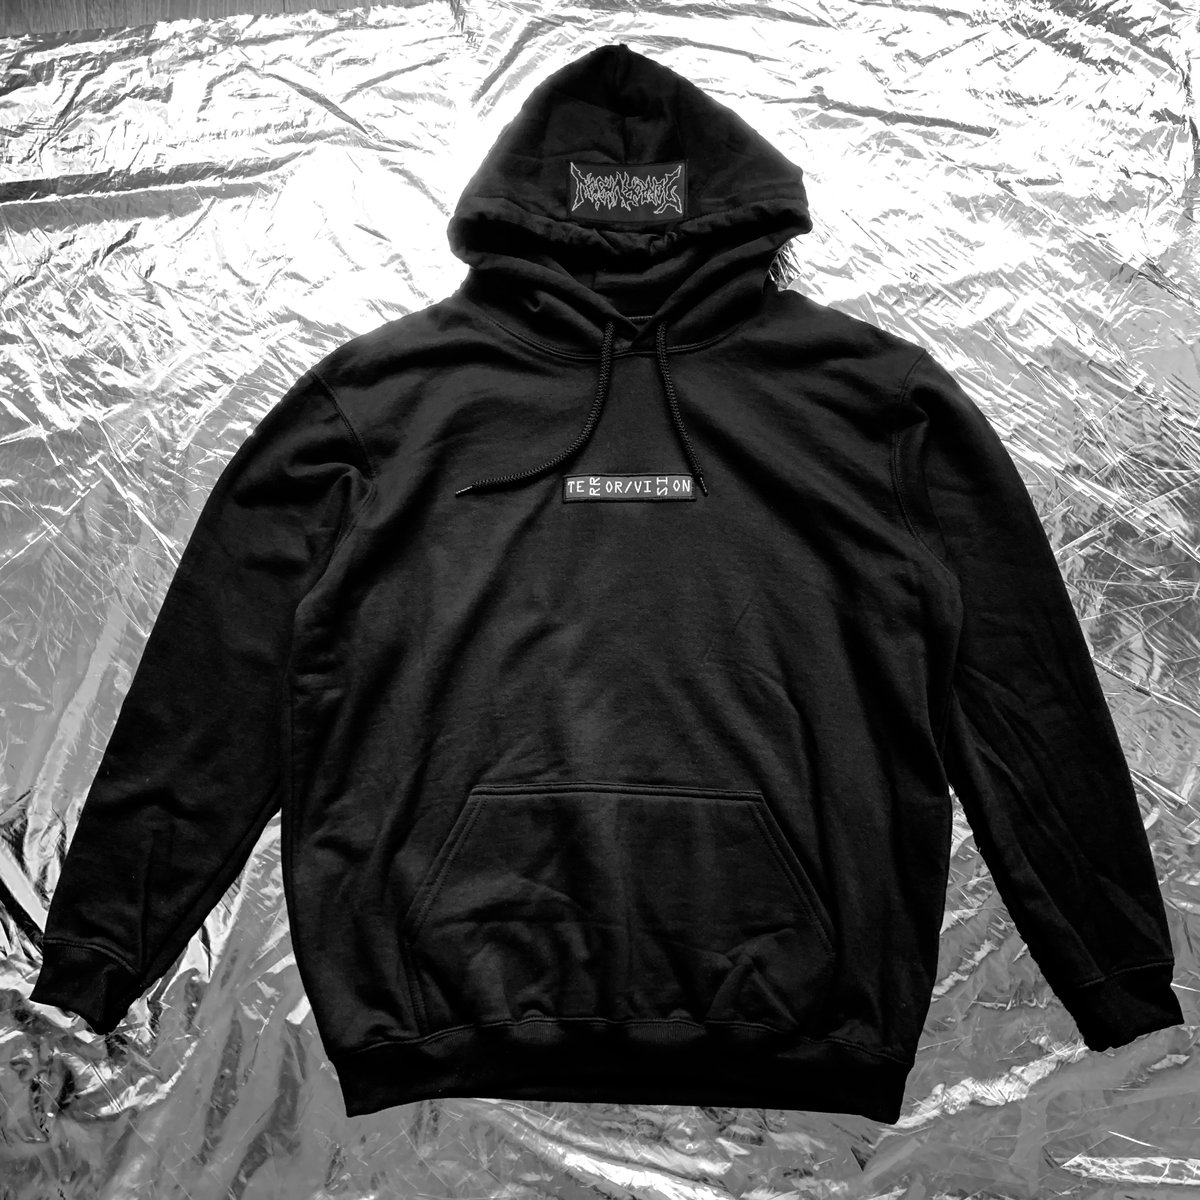 Image of TERROR VISION - Tech9 Cross hoodie (with one 3M reflective embroidery logo patch on the hood.)